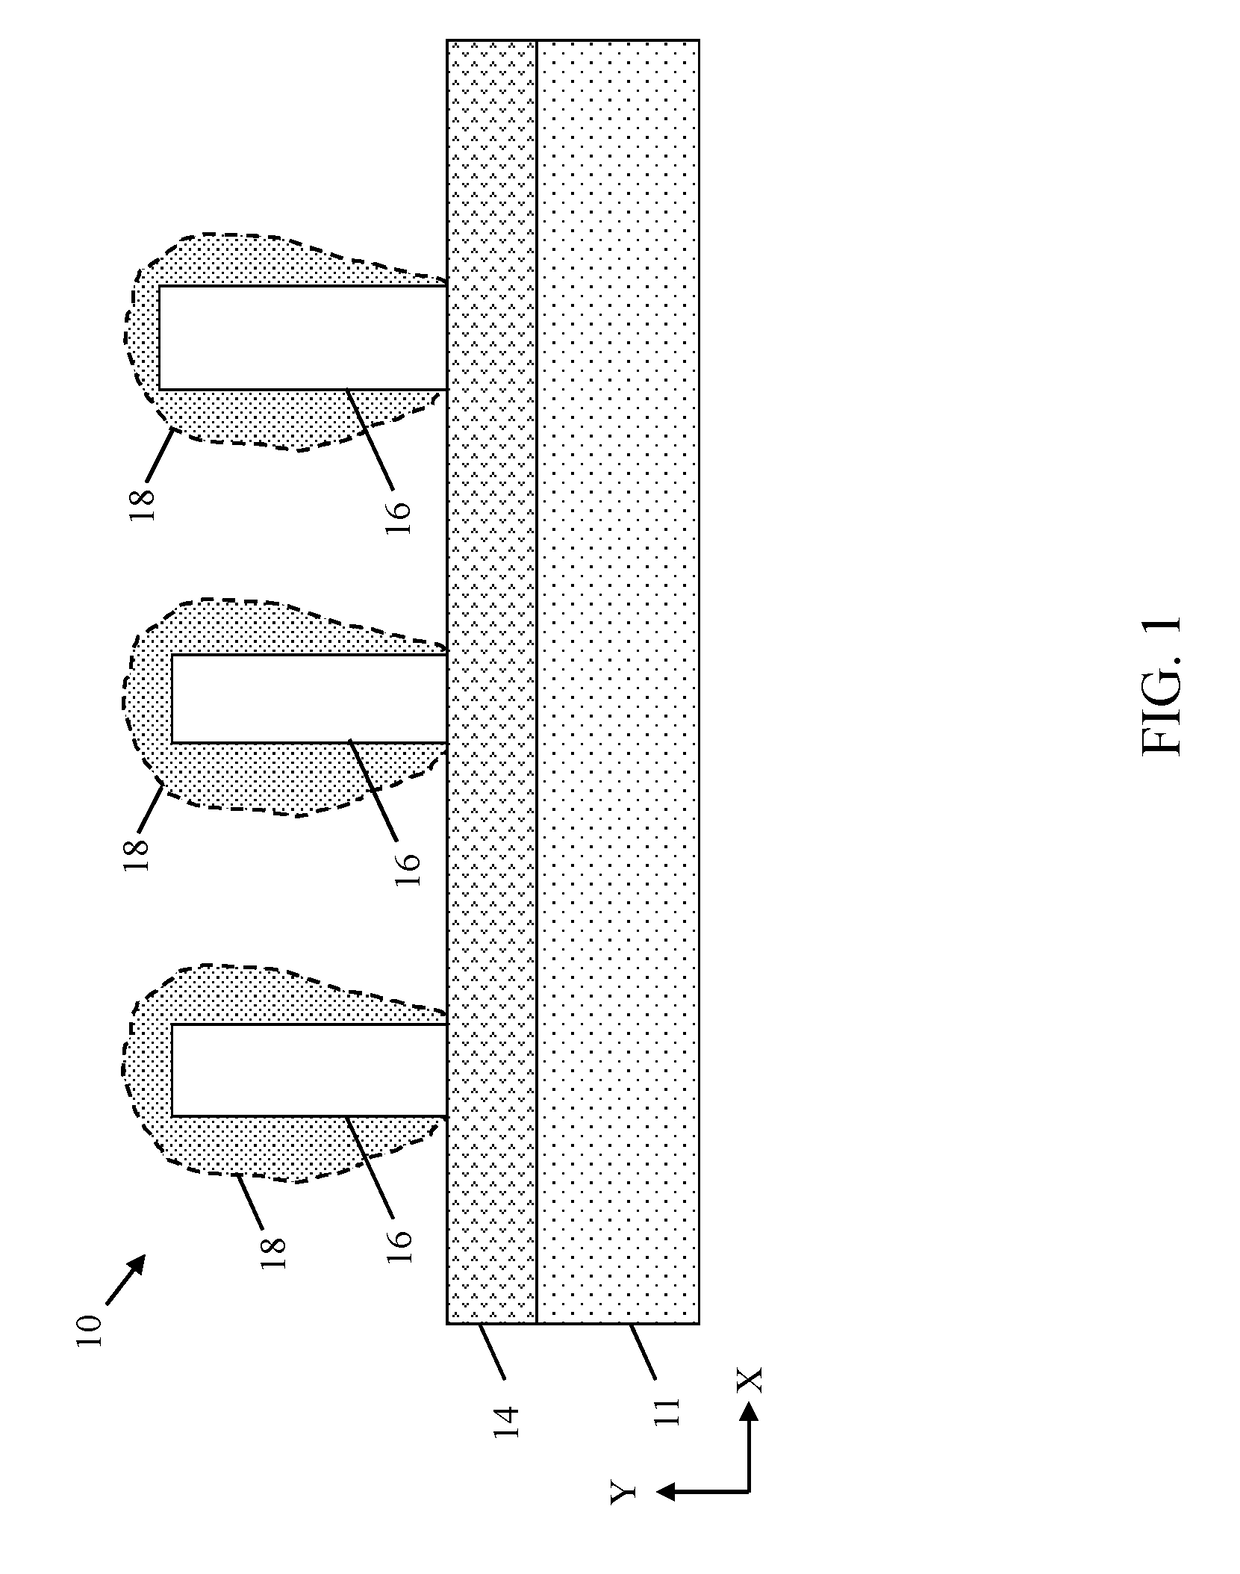 Transistor structure with varied gate cross-sectional area